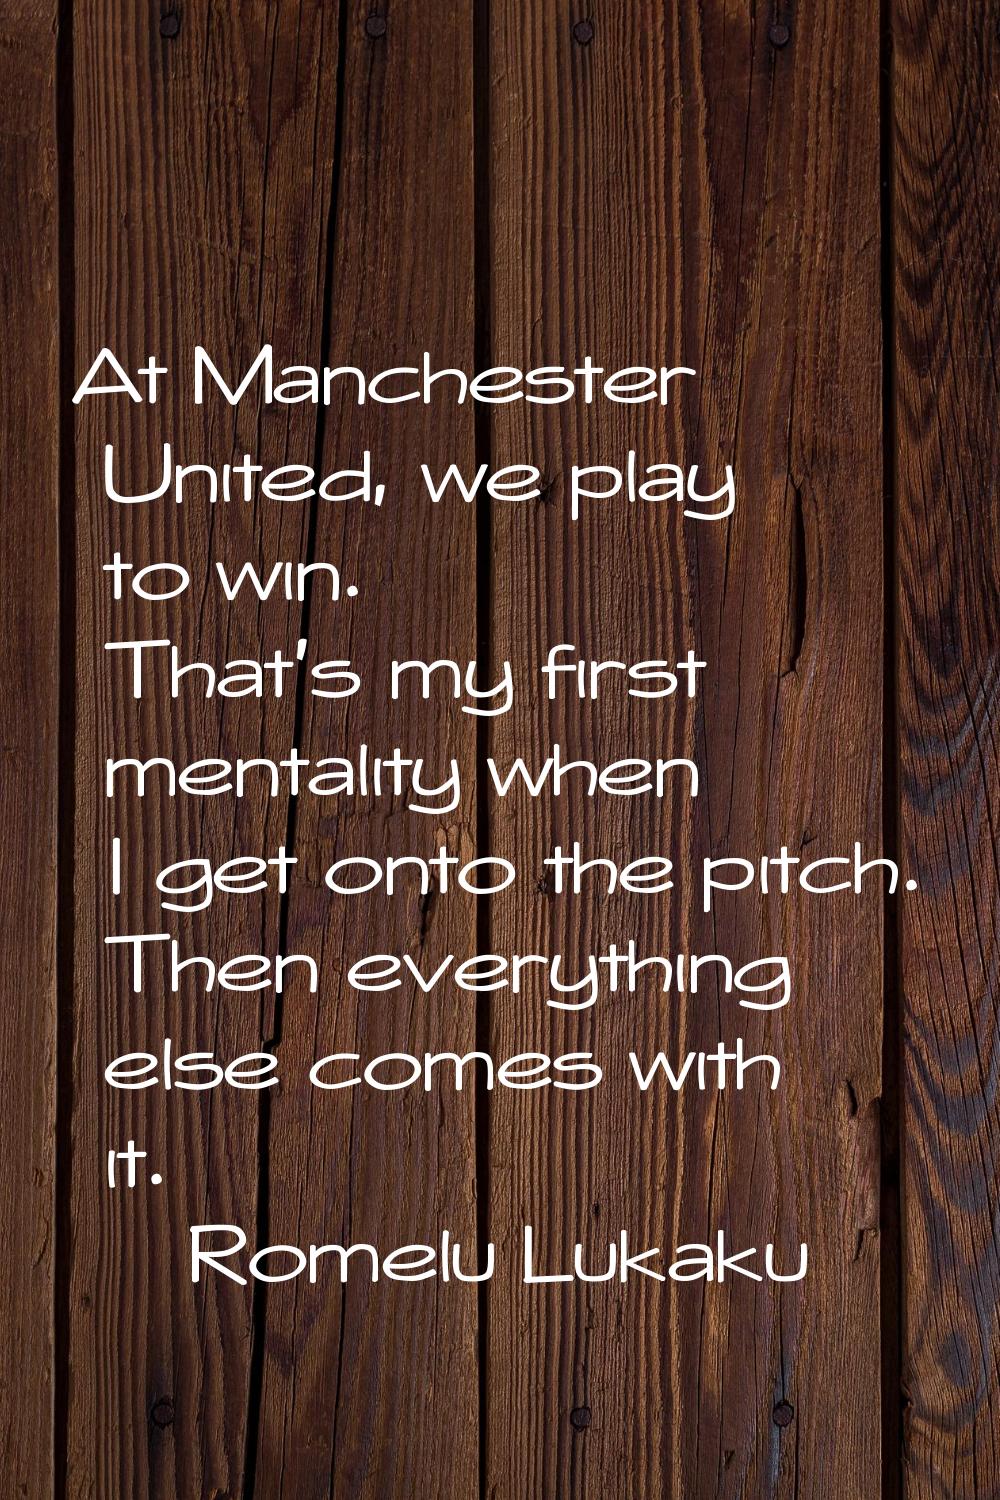 At Manchester United, we play to win. That's my first mentality when I get onto the pitch. Then eve